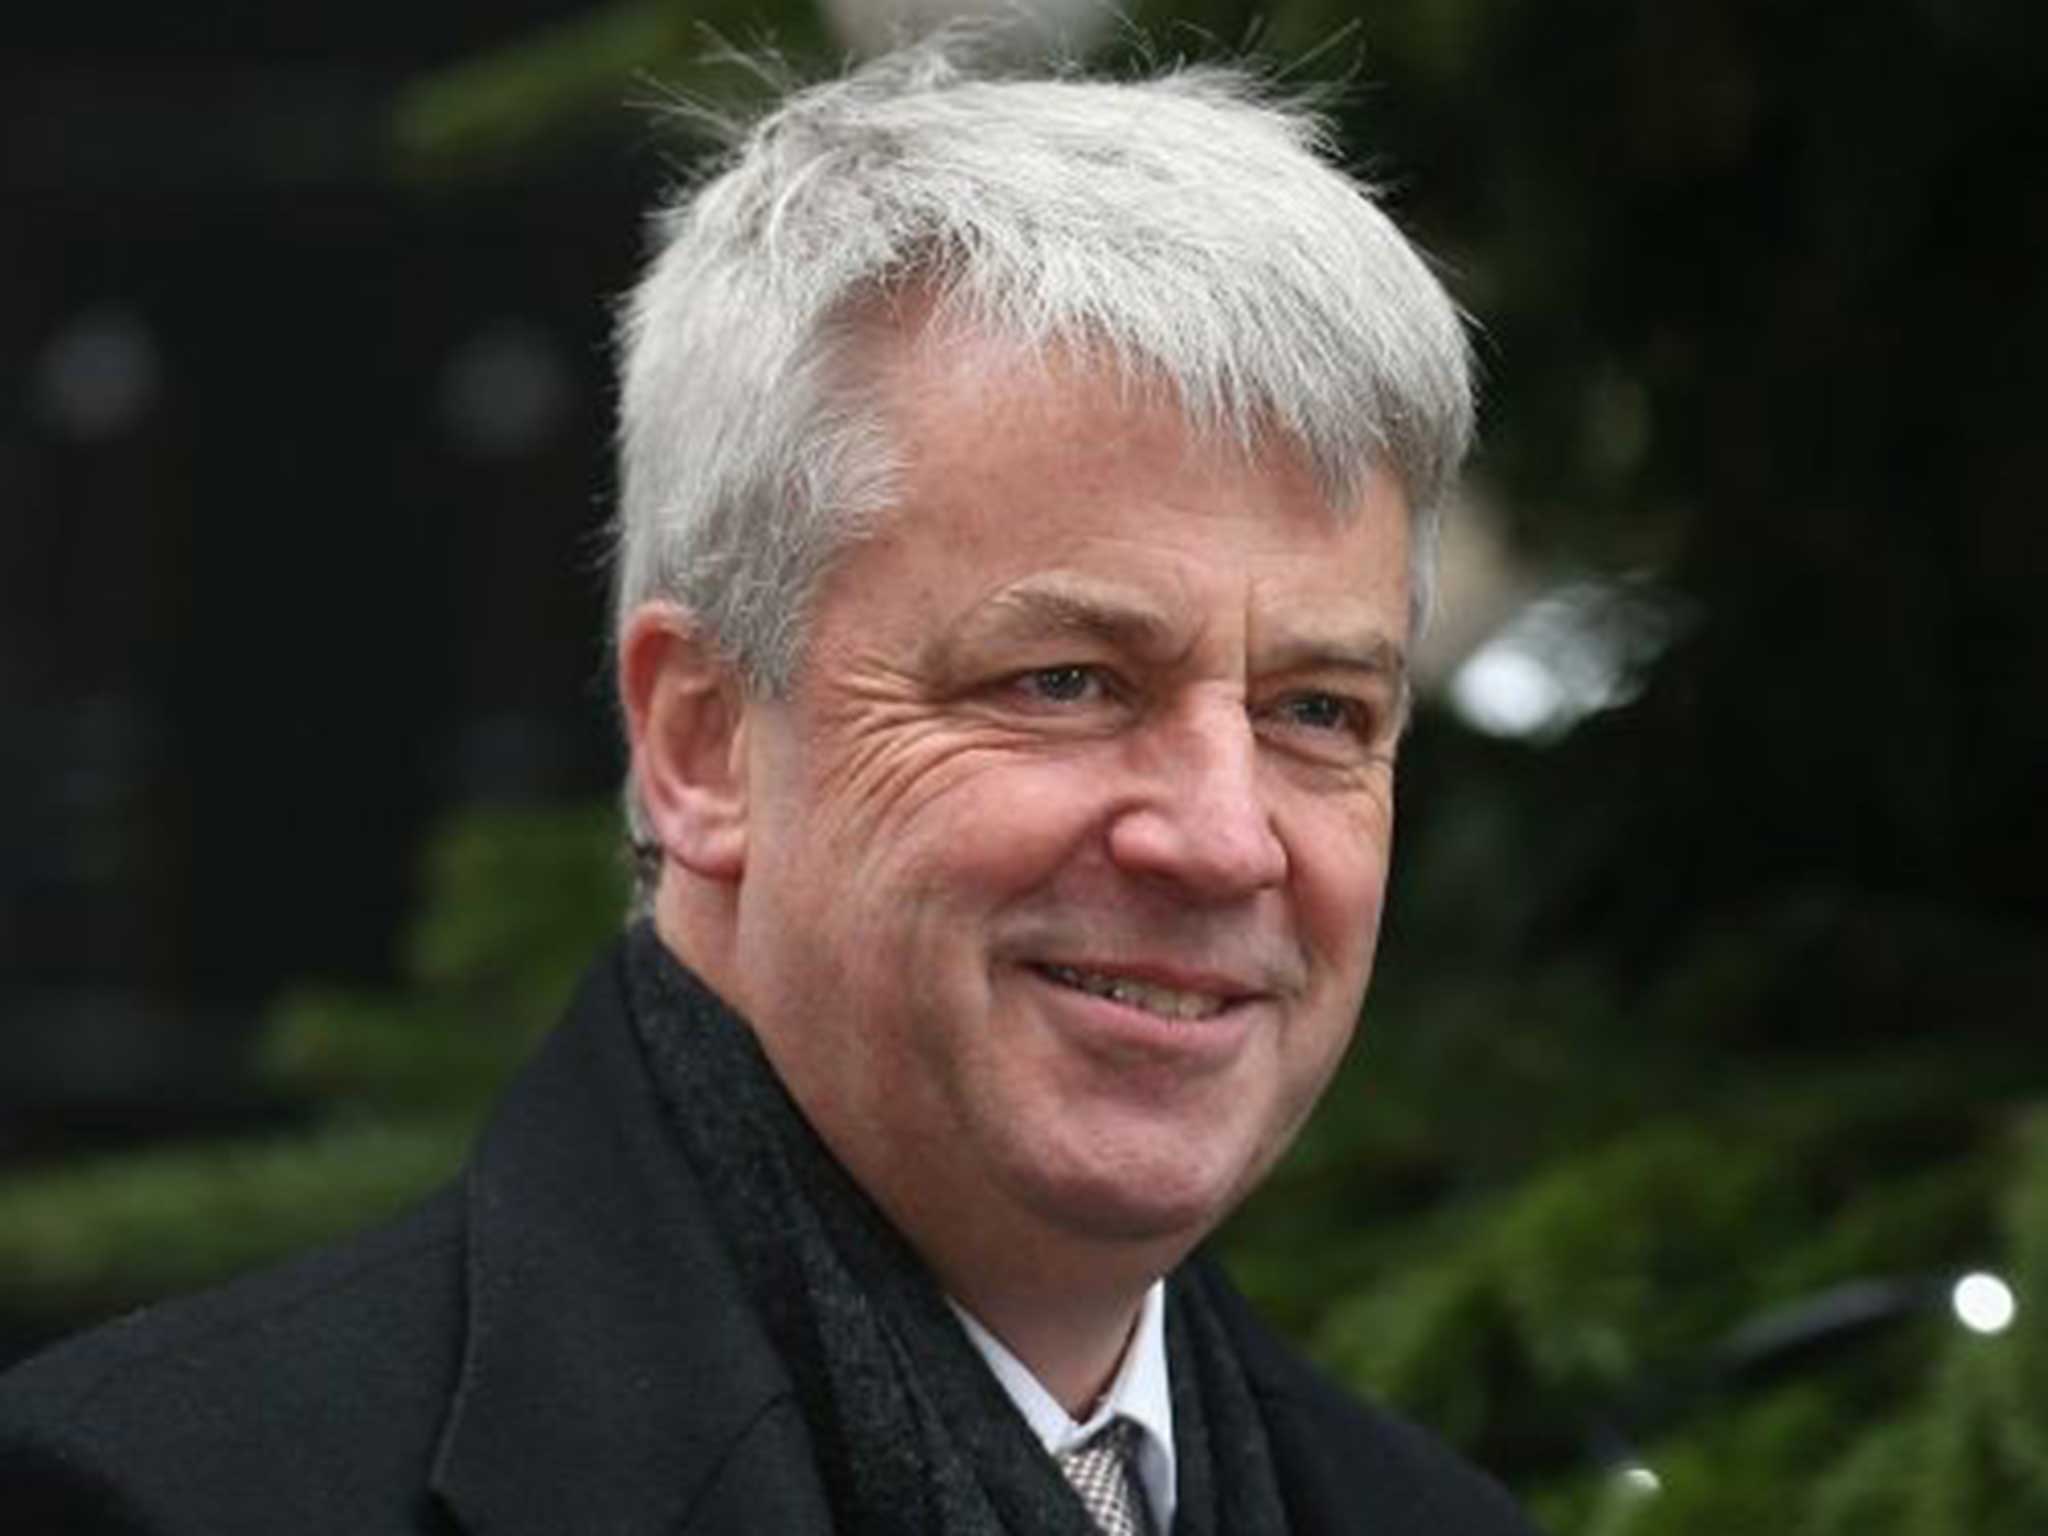 As Health Secretary Andrew Lansley overhauled the structure of the NHS